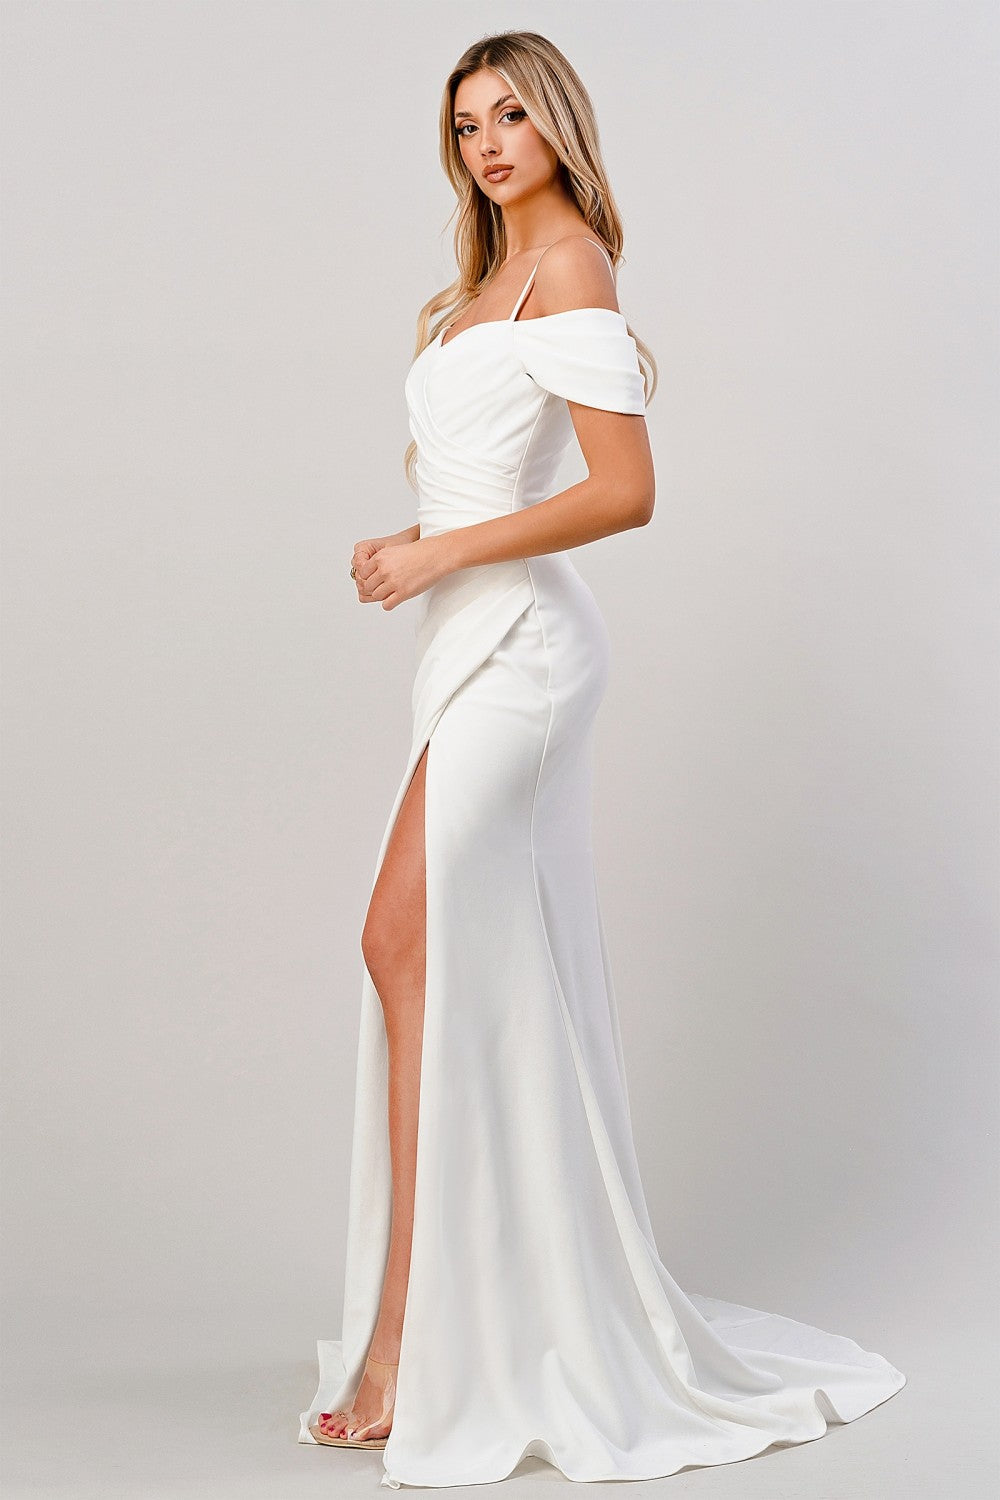 White Fitted Off Shoulder Gown By Cinderella Divine -KV1057W